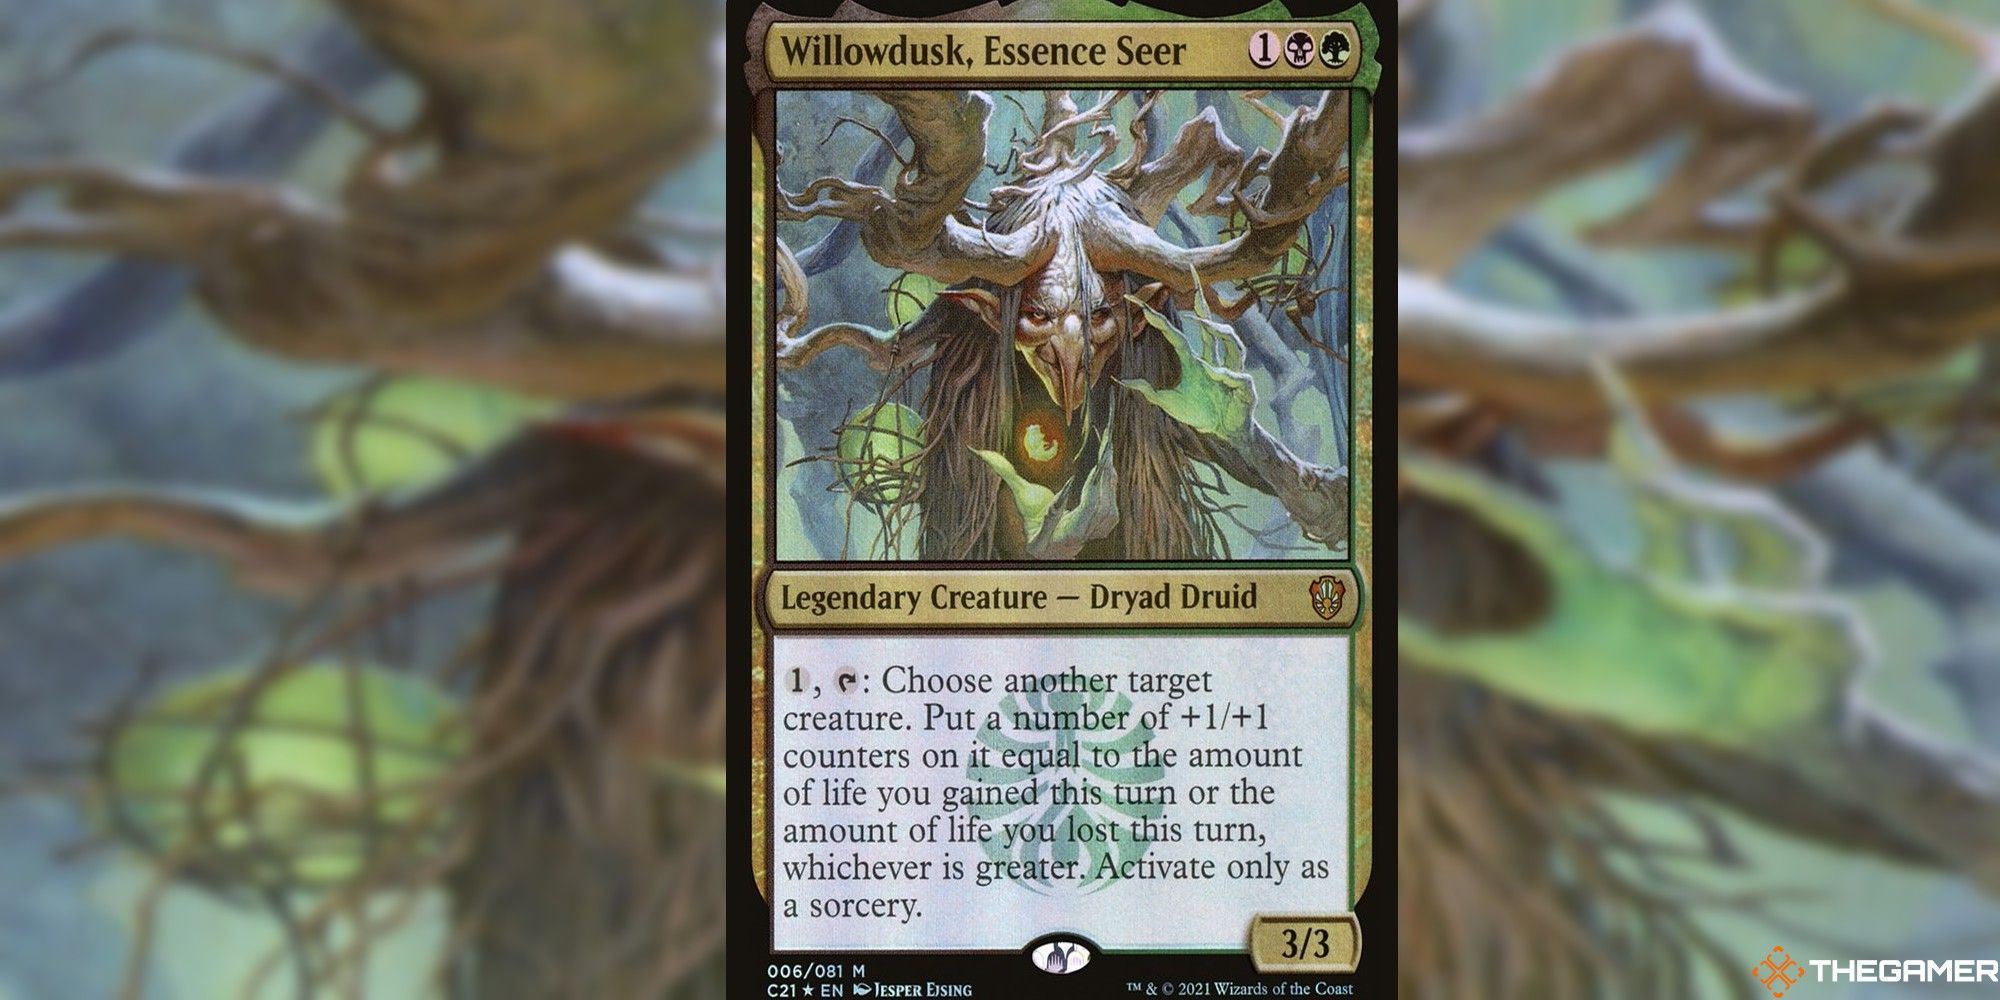 willowdusk, essence seer full card and art background